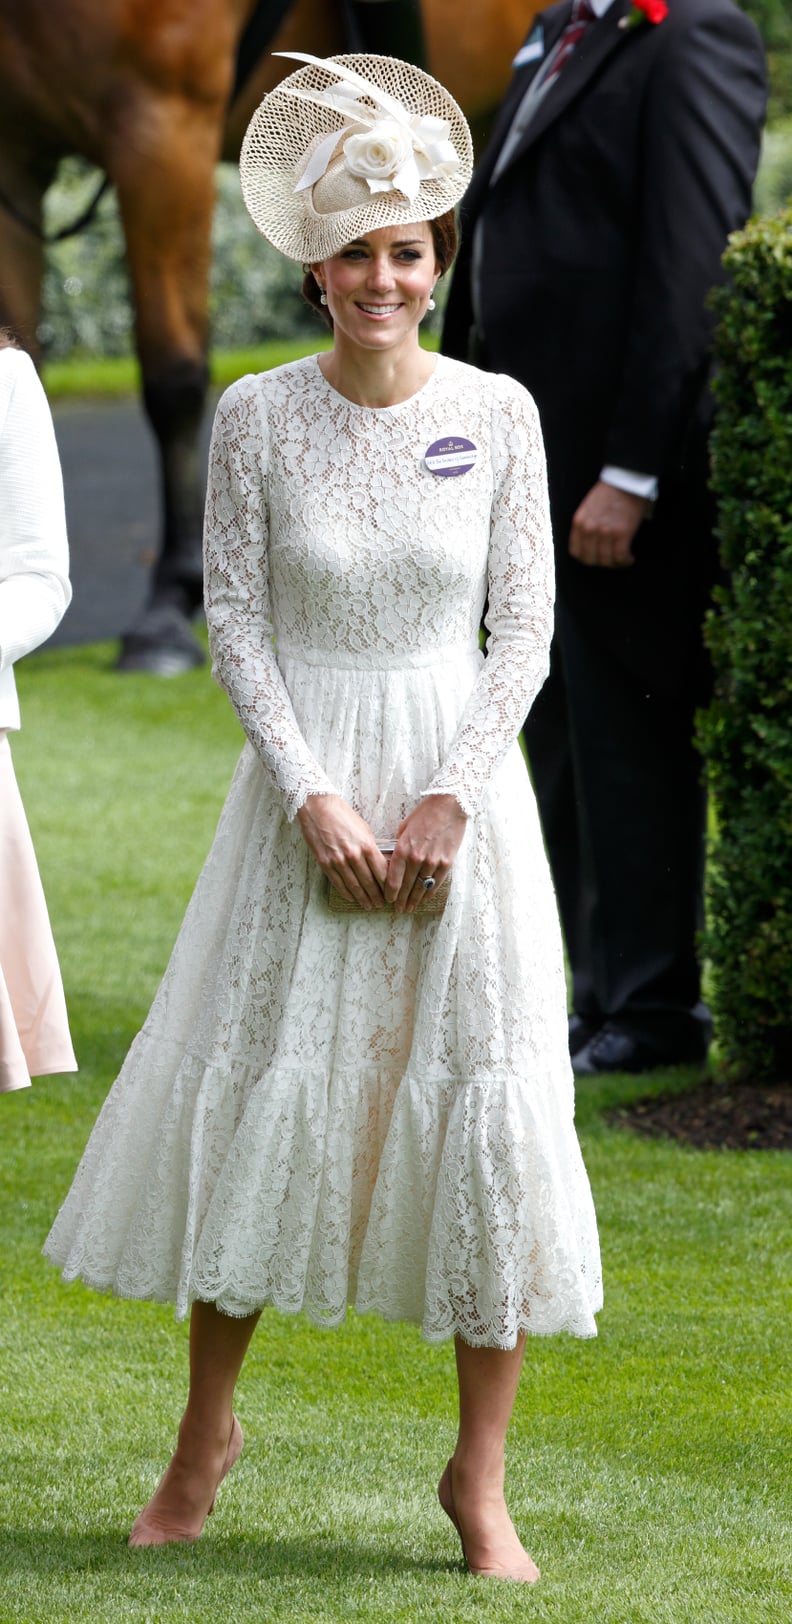 It's Possible Kate Will Wear White, Like Pippa Did at the Royal Wedding